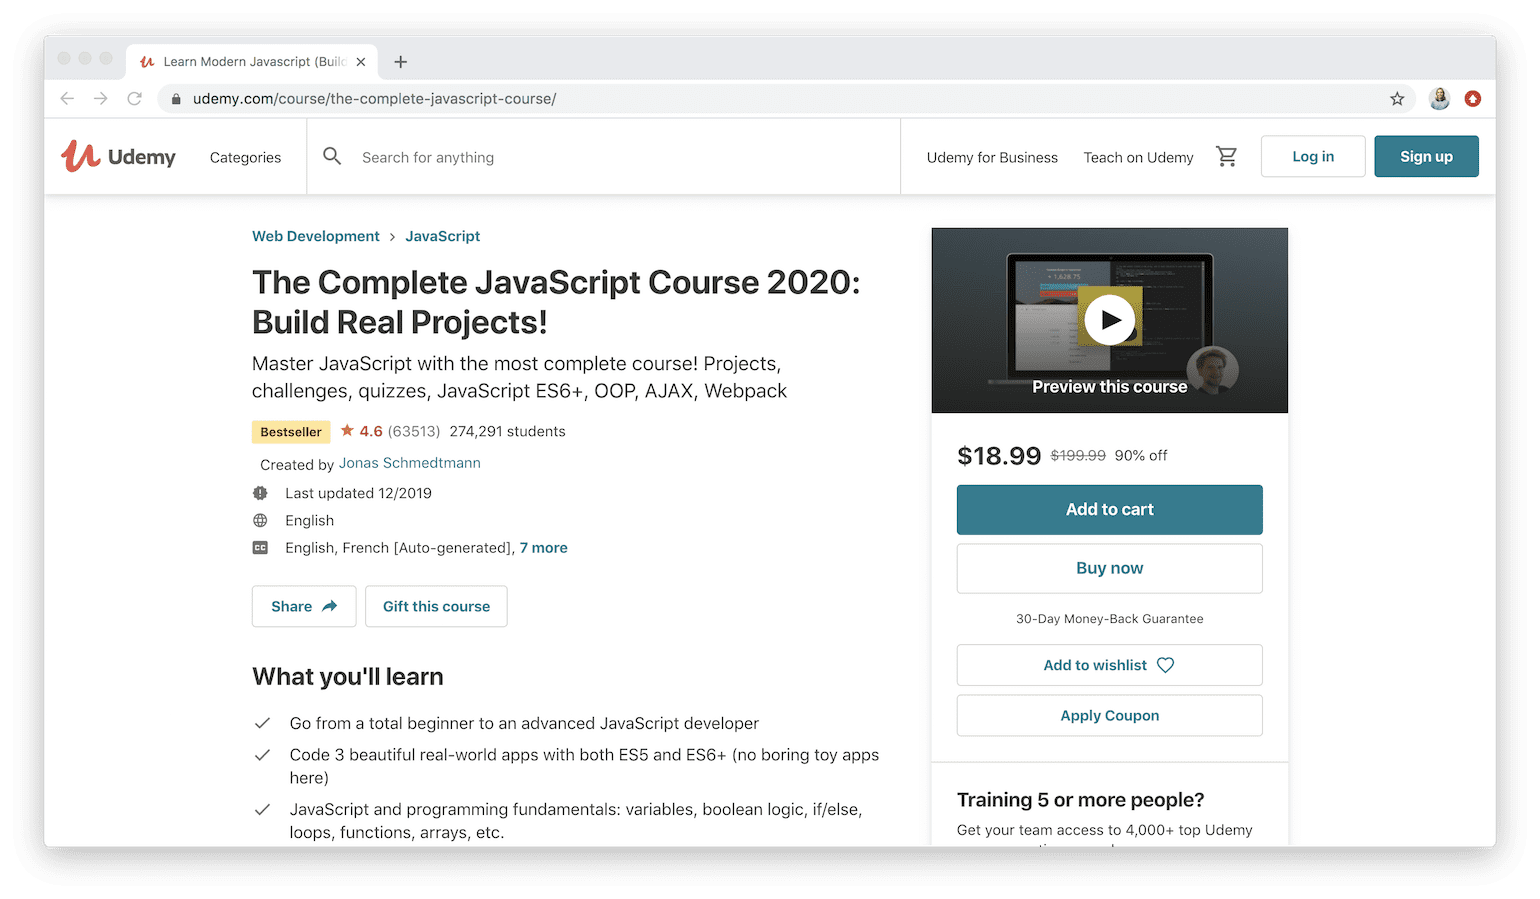 The Complete JavaScript Course 2020: Build Real Projects on Udemy